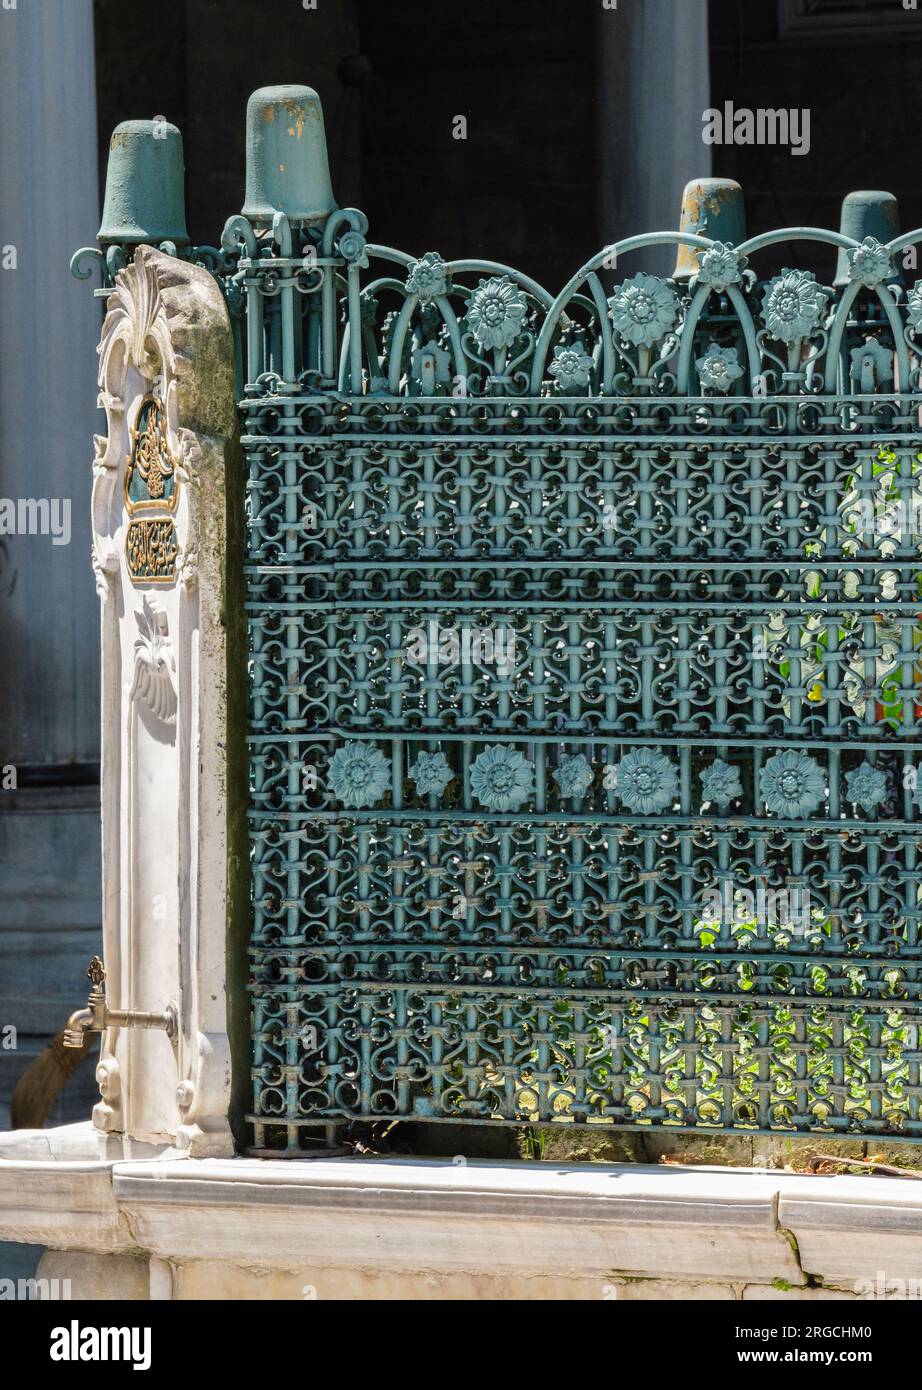 Istanbul, Turkey, Turkiye. Eyup Sultan Mosque, Decorative Grillwork in the Courtyard, Water Faucet on left. Stock Photo